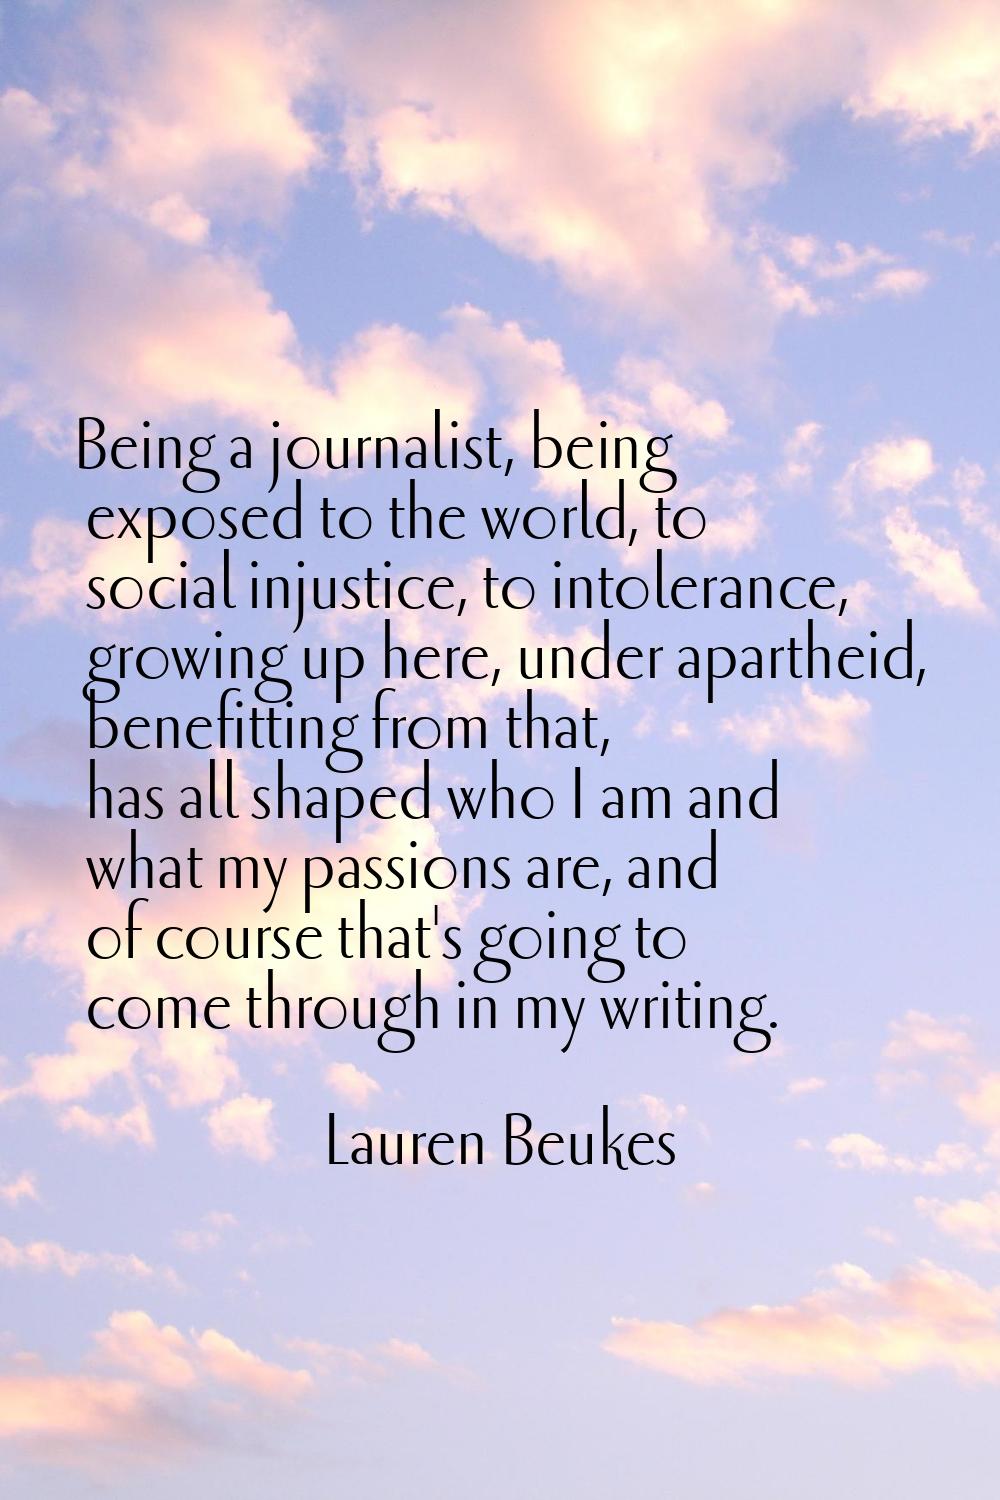 Being a journalist, being exposed to the world, to social injustice, to intolerance, growing up her